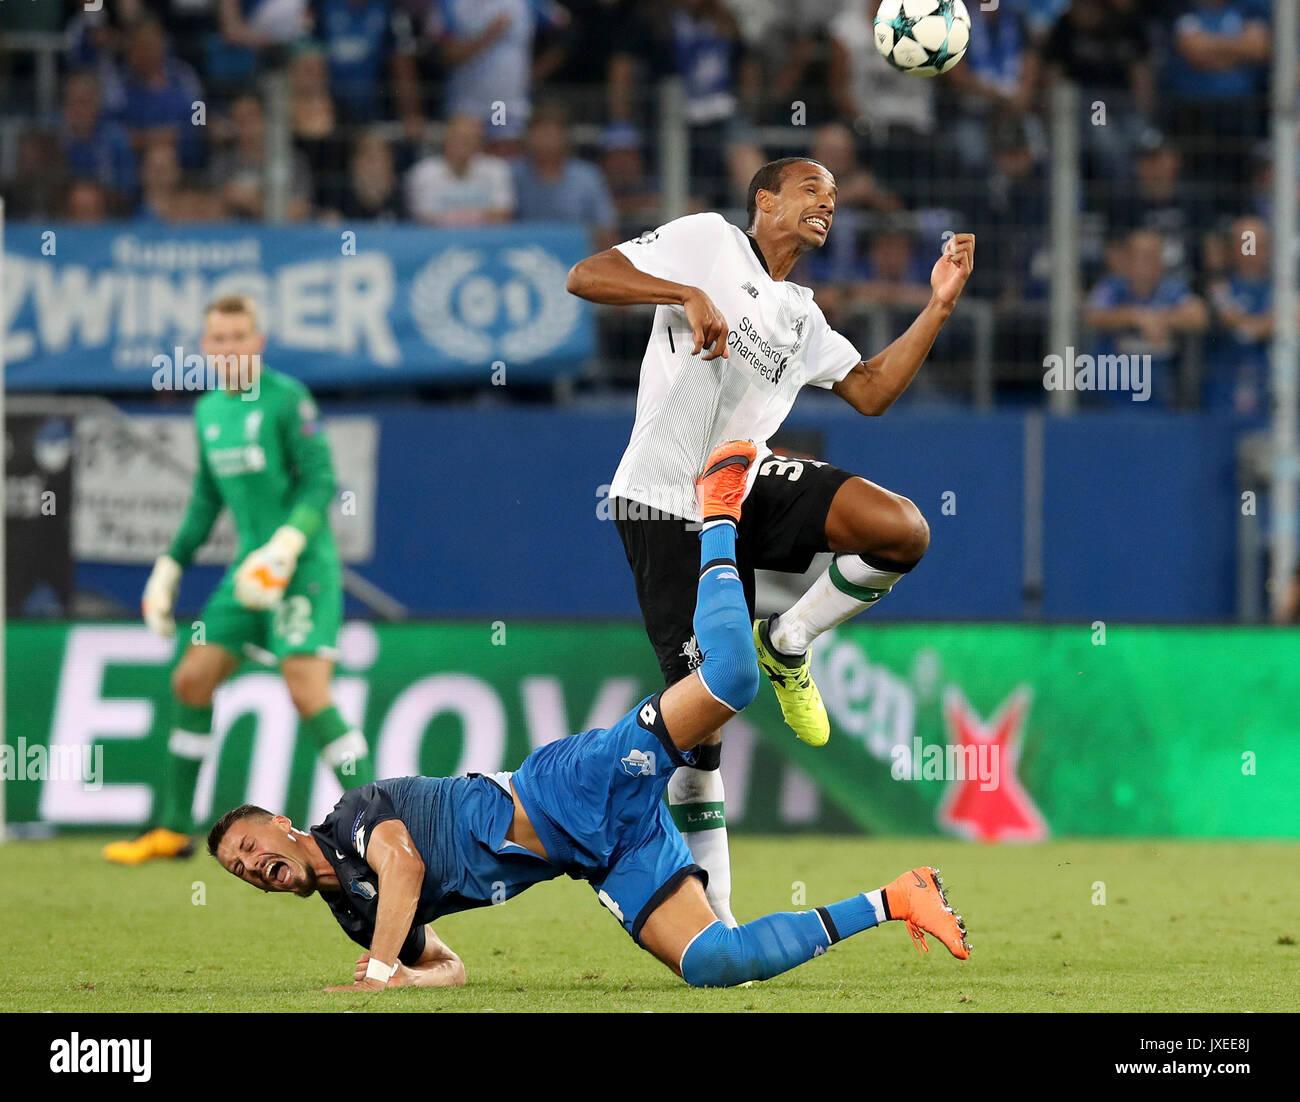 Sinheim, Germany. 15th Aug, 2017. Joel Matip (R) of Liverpool and Sandro Wagner of 1899 Hoffenheim compete during the UEFA Champions League Qualifying Play-Offs Round First Leg match at Wirsol Rhein-Neckar-Arena in Sinsheim, Germany, on August 15, 2017. Liverpool won 2-1. Credit: Joachim Bywaletz/Xinhua/Alamy Live News Stock Photo